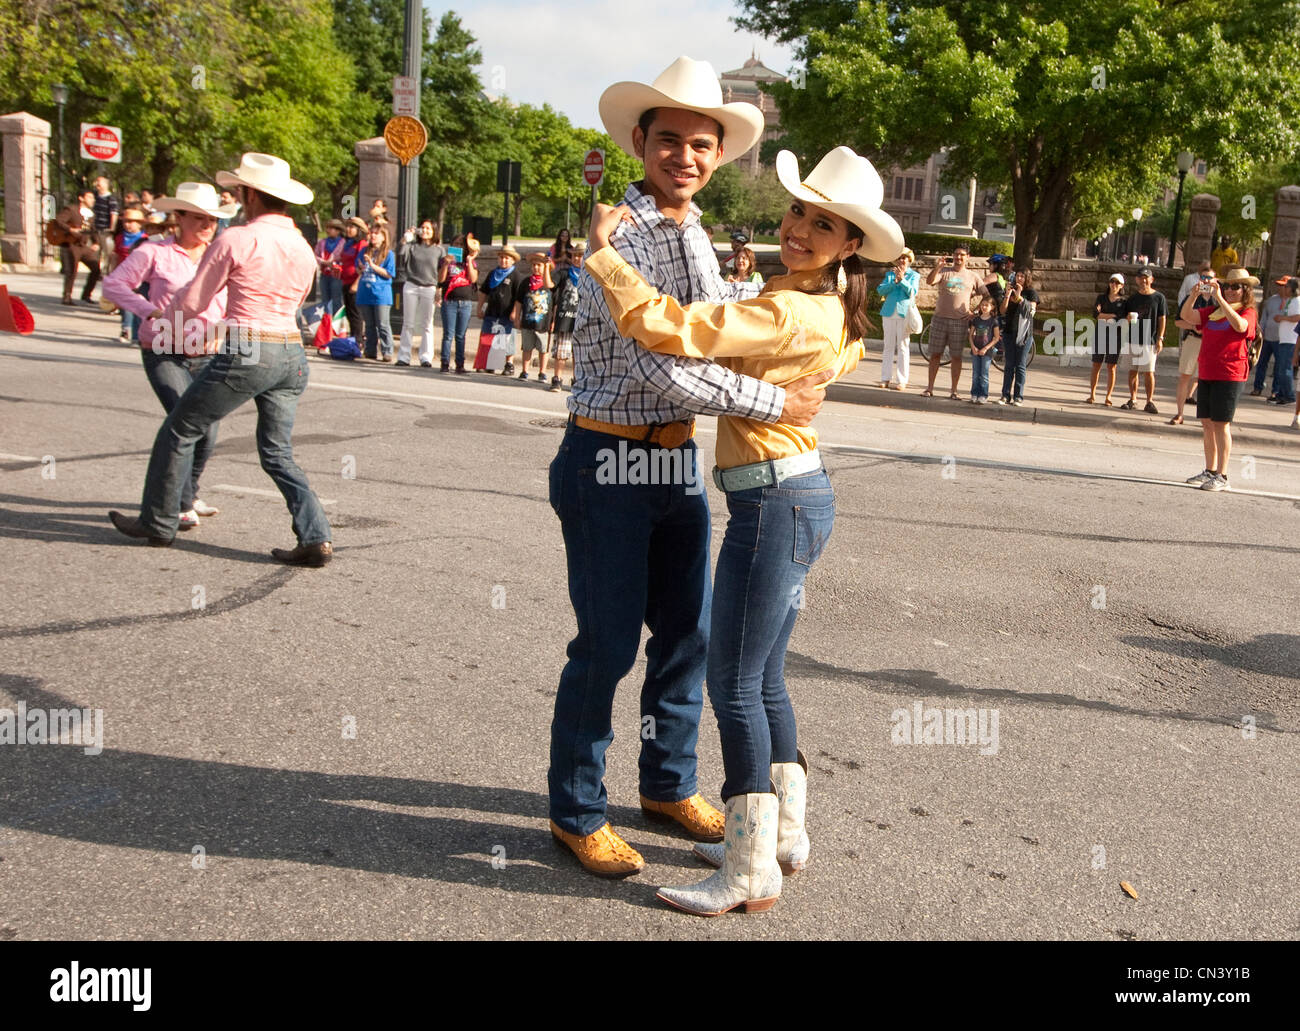 Young members of student Ballet Folklorico perform dance  traditional Norteño clothing from Northern Mexico during a parade Stock Photo